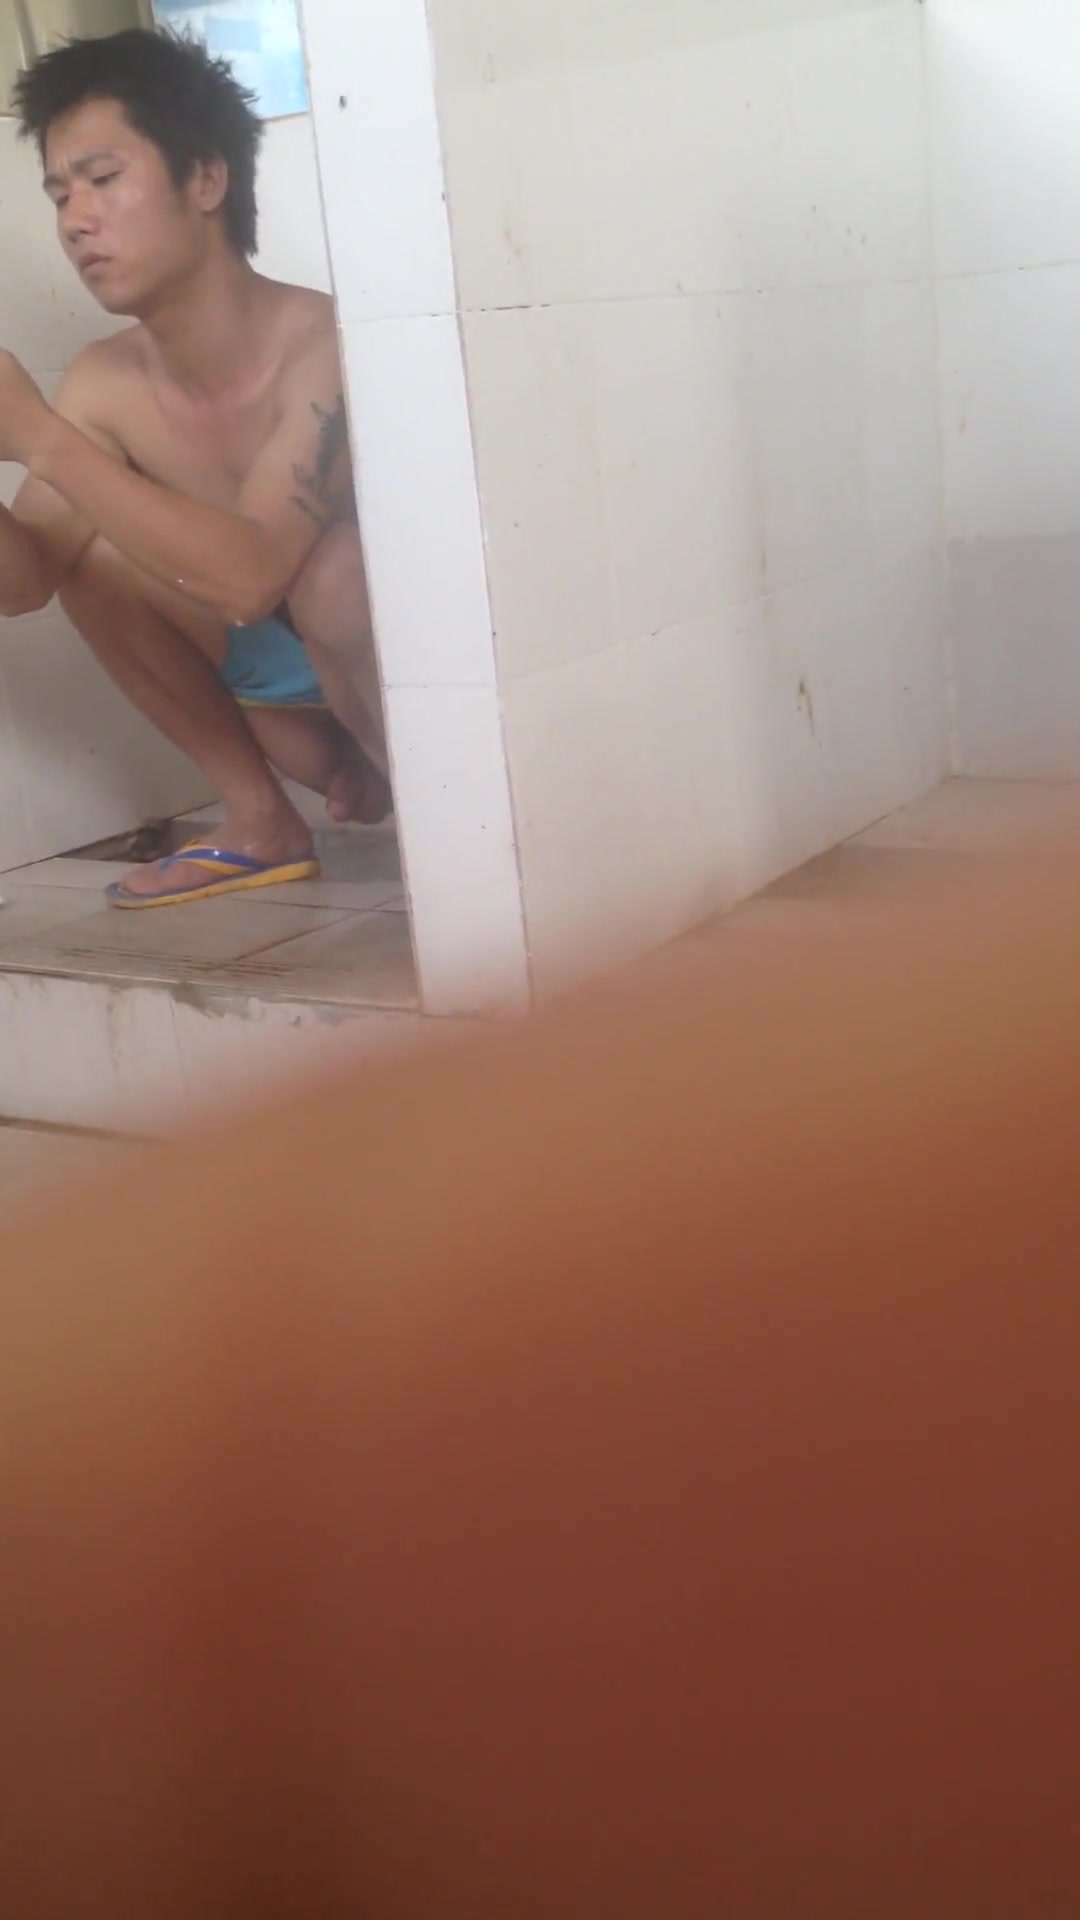 CHINESE BOY SHITTING IN THE HOLE 3